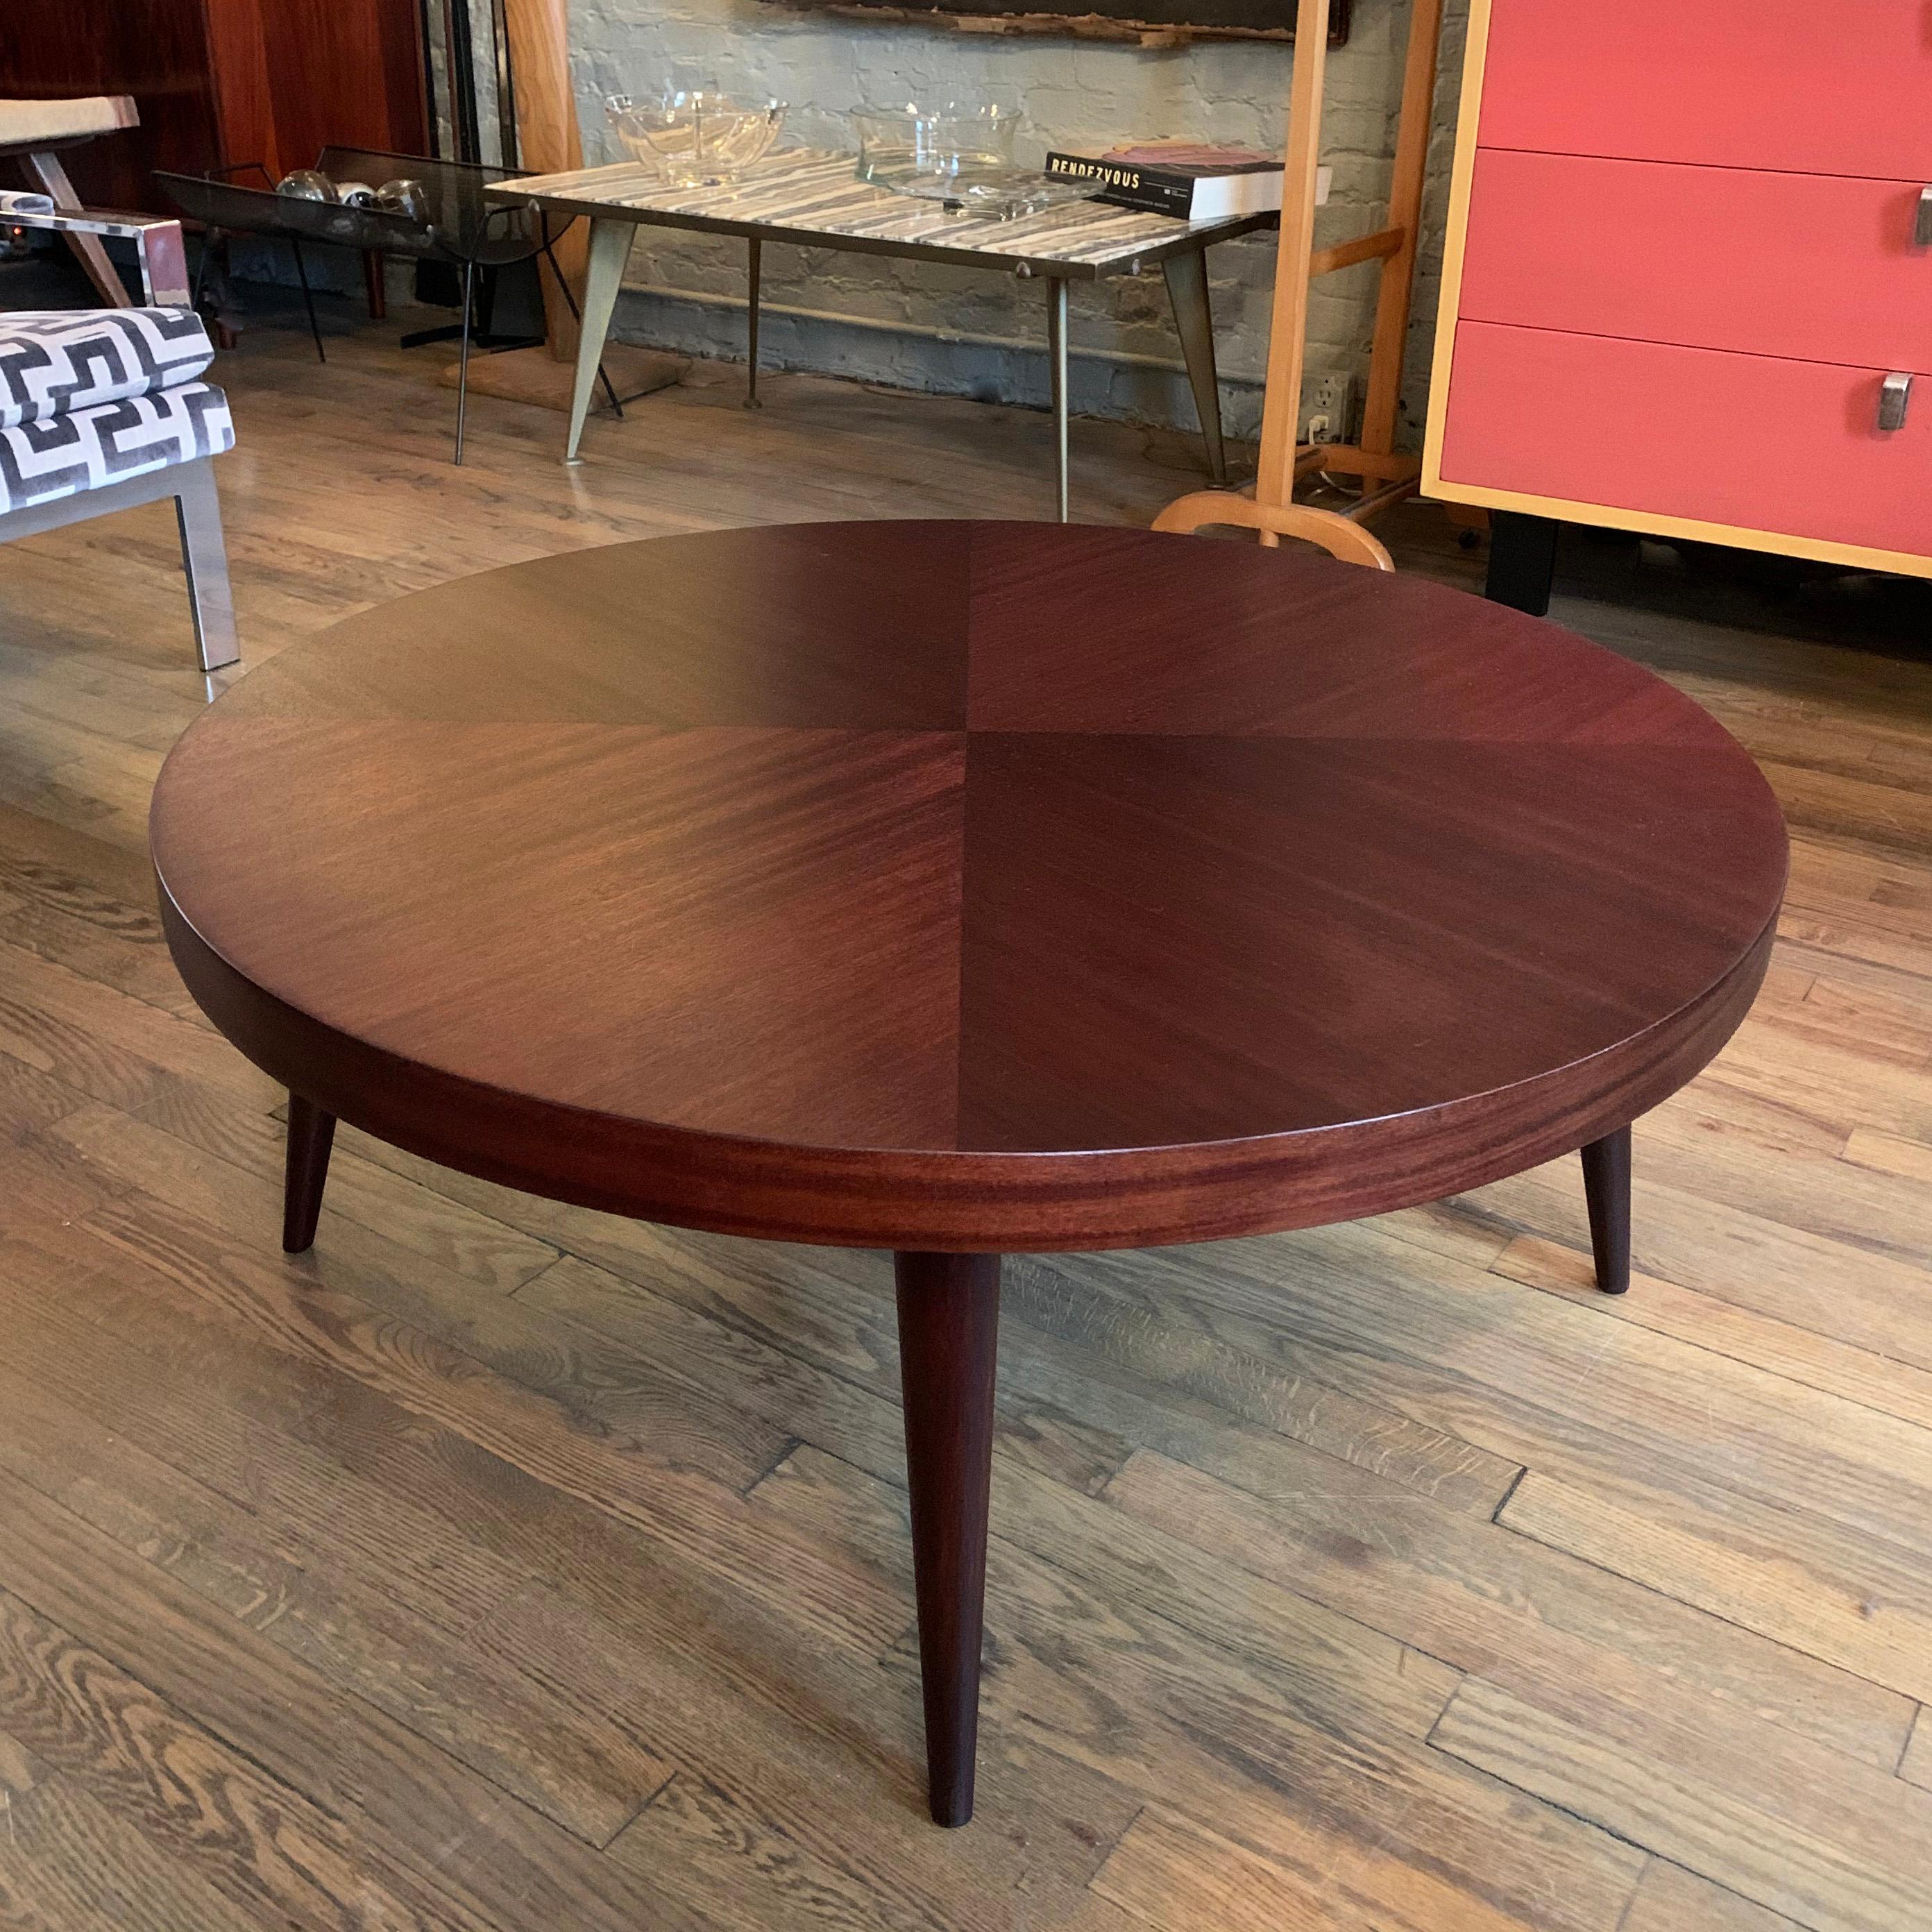 Mid-Century Modern, low, round, mahogany coffee table features a contrasting grain detail on top and tapered legs.